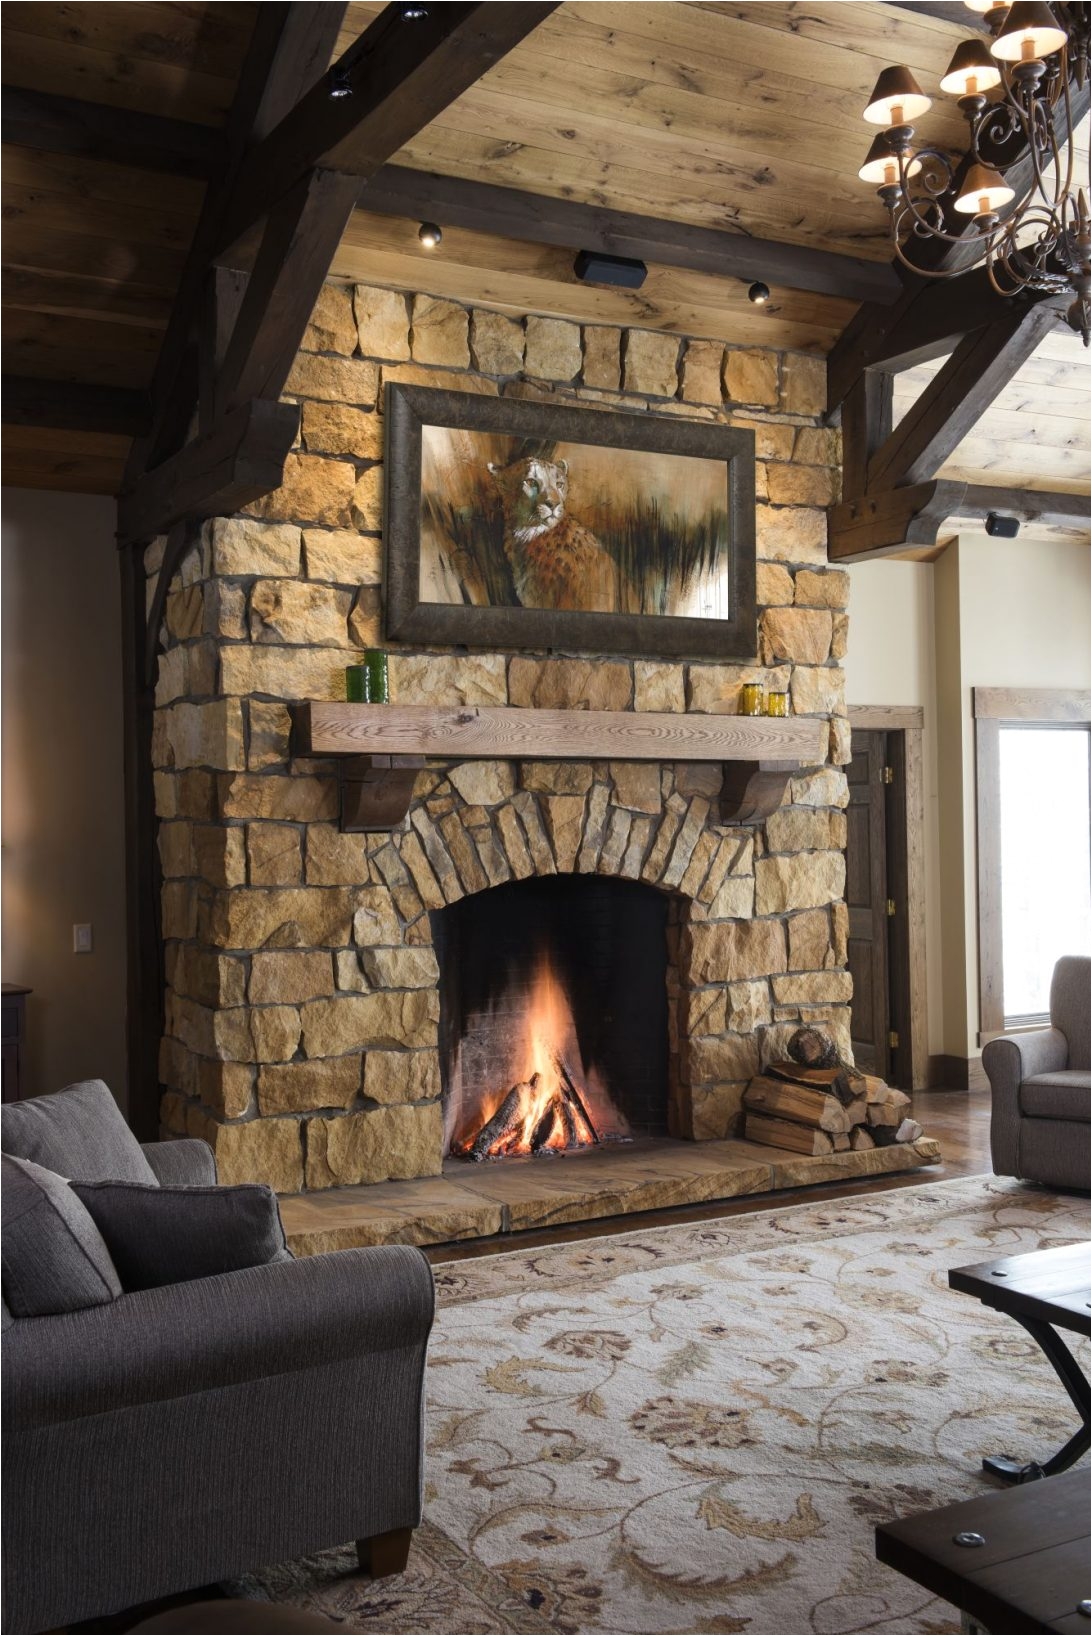 83 most matchless rumford style fireplace wood fireplace rumford fireplace insert shallow fireplace build wood burning